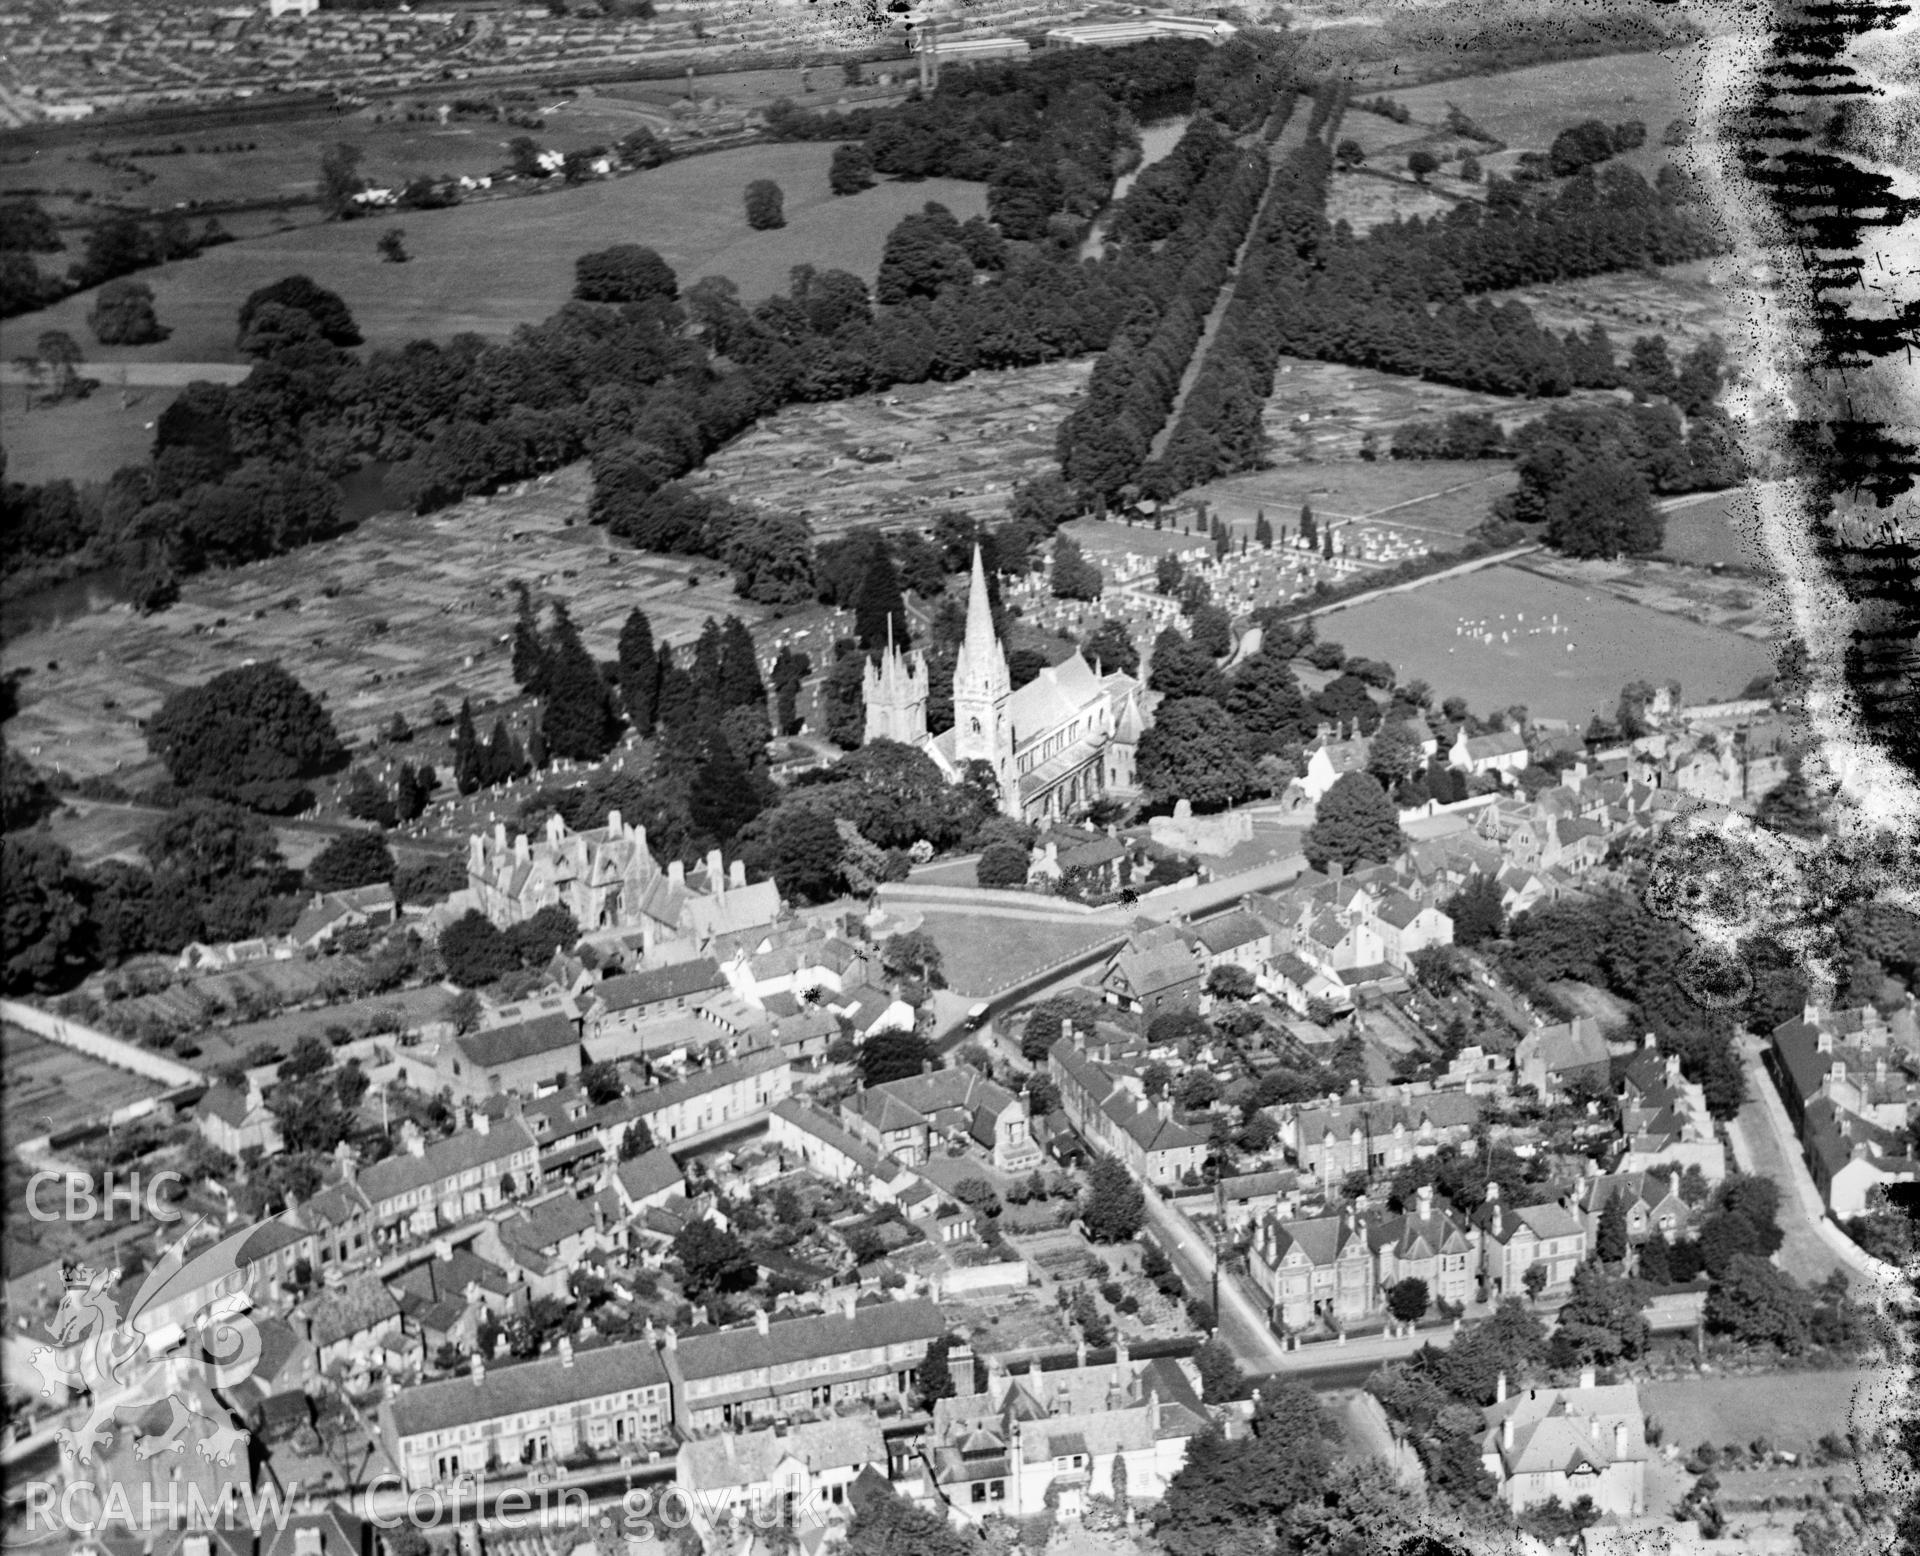 General view of Llandaff North, showing cathedral, oblique aerial view. 5?x4? black and white glass plate negative.